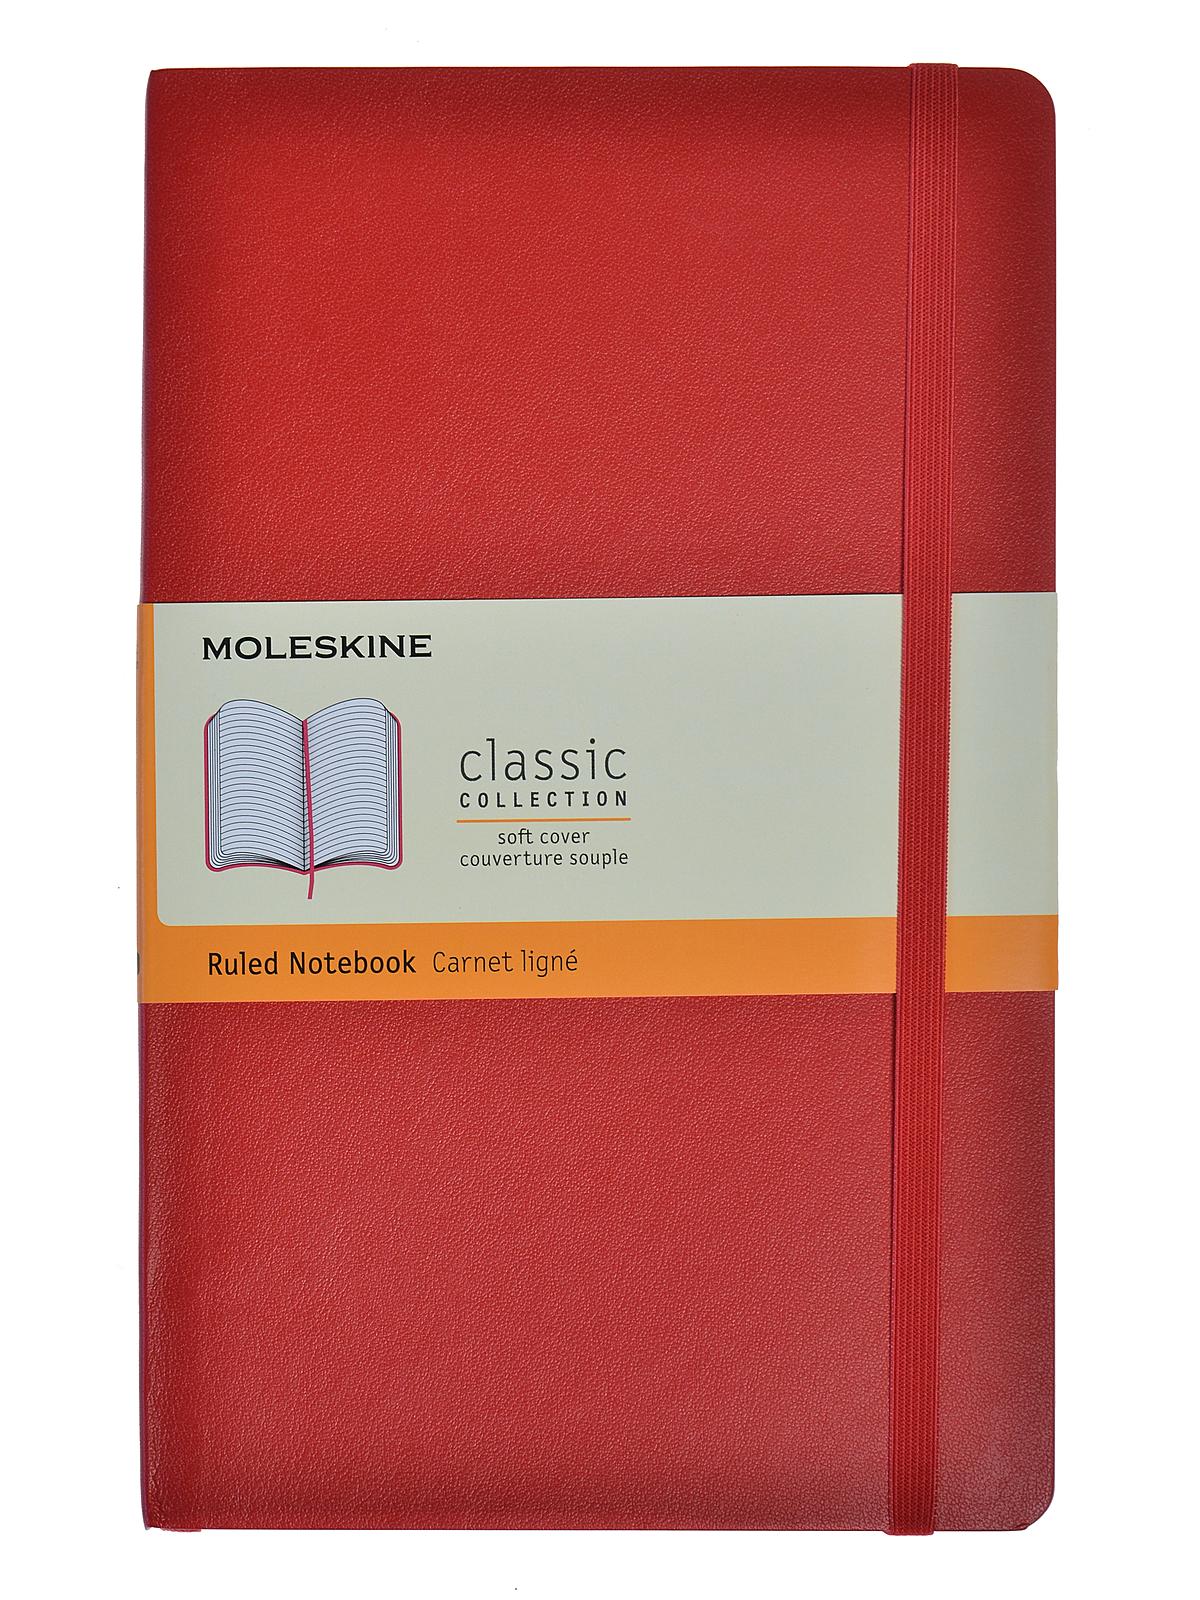 Classic Soft Cover Notebooks Red 5 In. X 8 1 4 In. 192 Pages, Lined